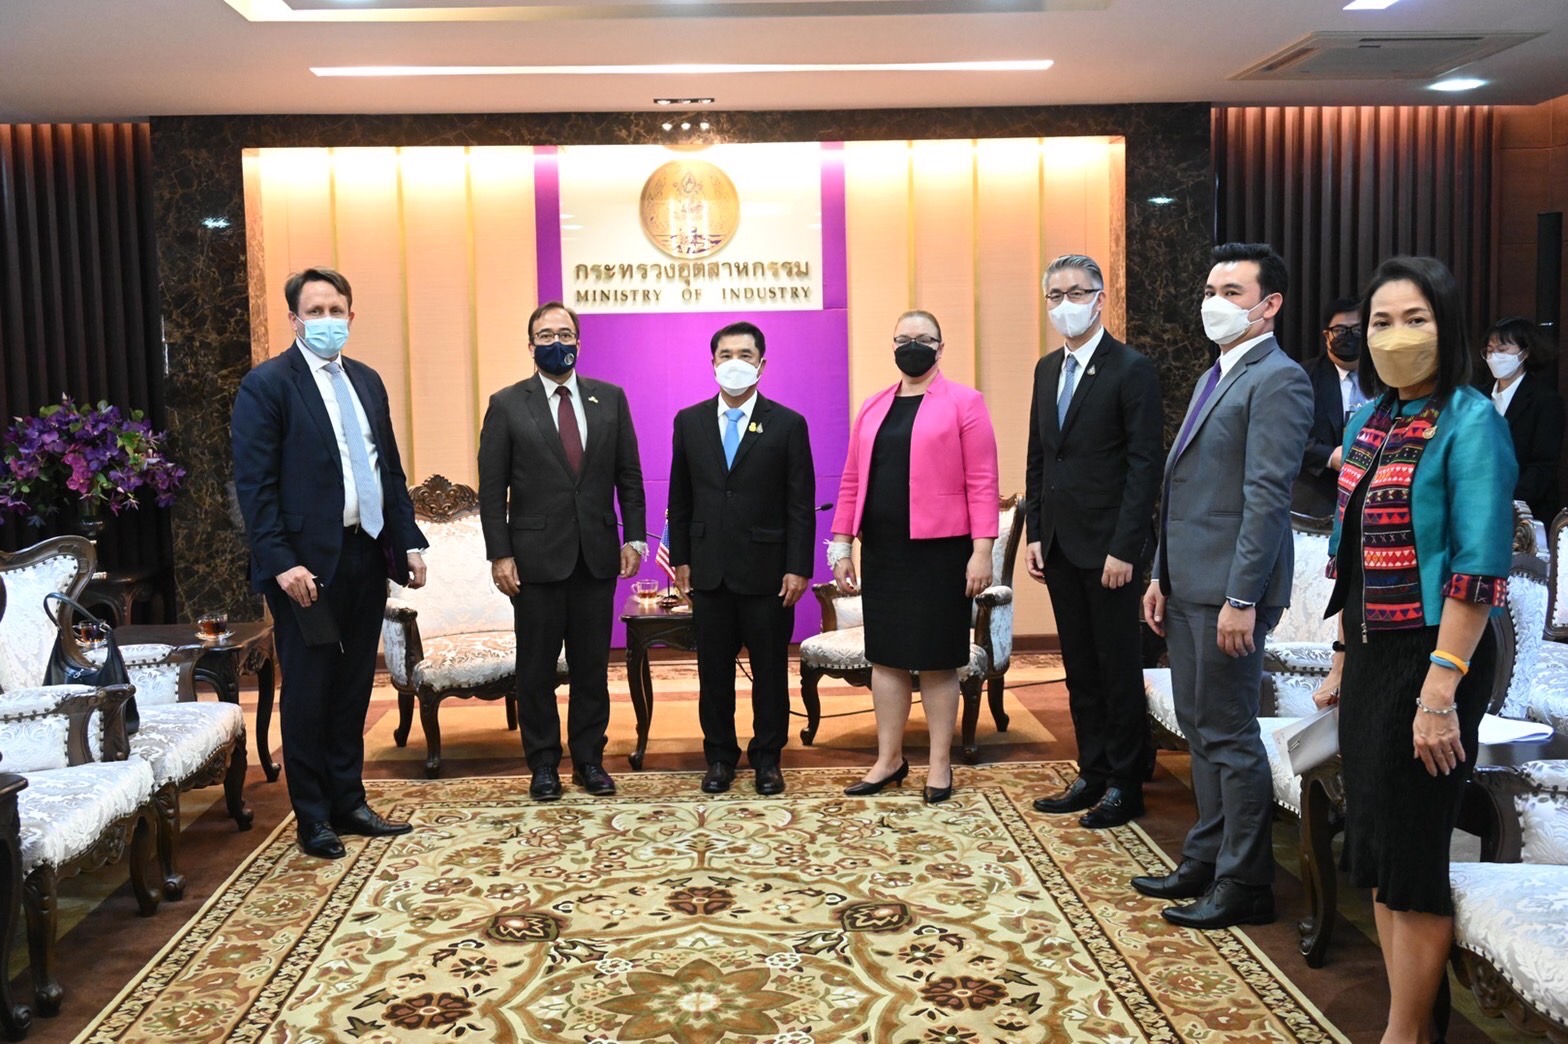 Minister of Industry, Mr. Suriya, Allows Charg? d'Affaires a.i. of the U.S. Embassy in Thailand to Meet